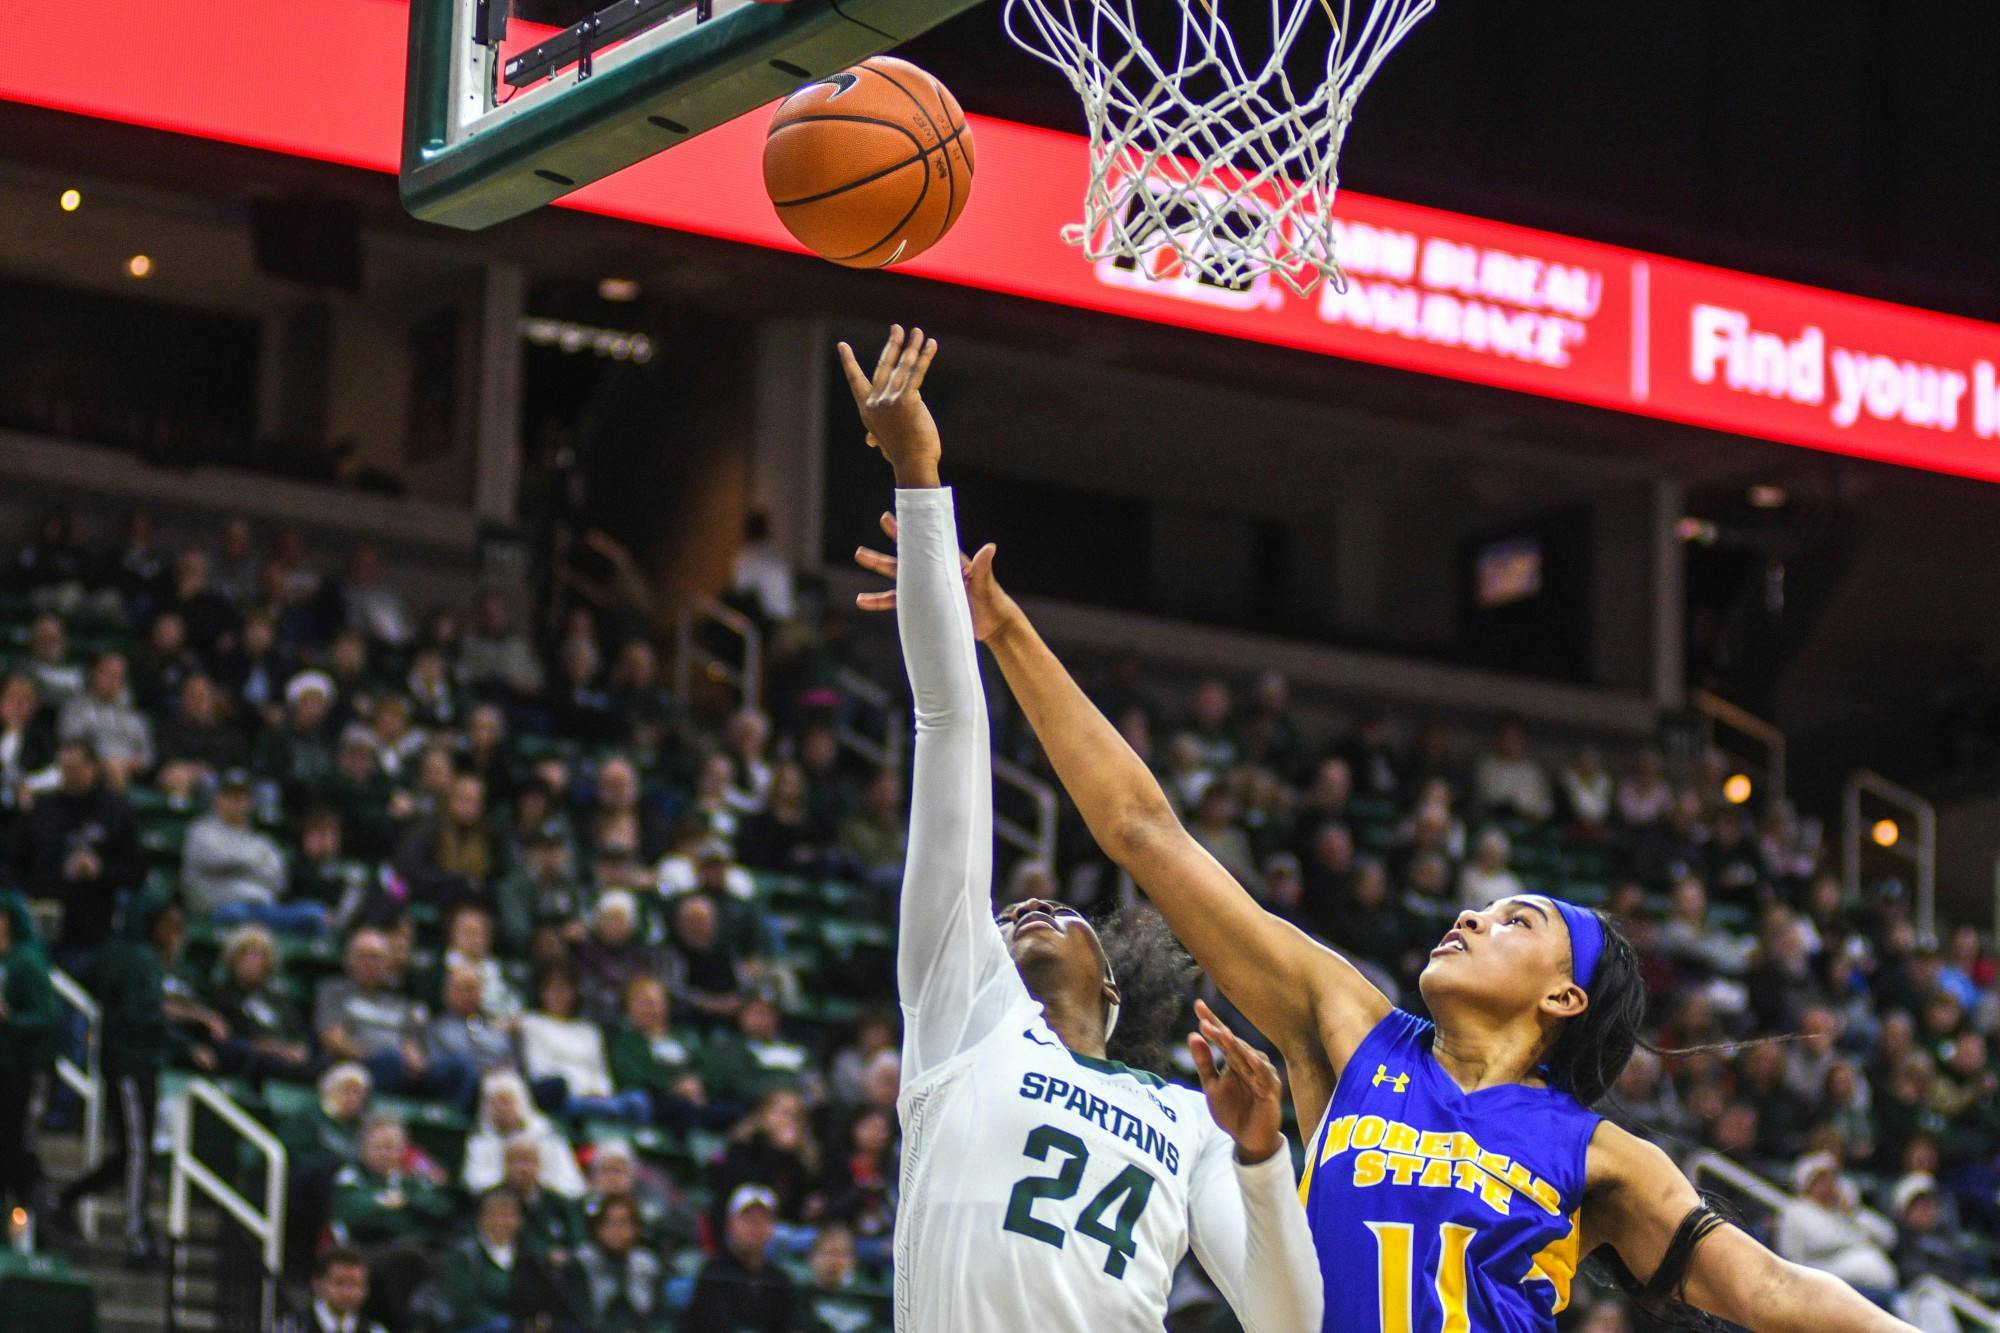 <p>Sophomore guard Nia Clouden (24) shoots the ball during the game against Morehead State on Dec. 15, 2019 at Breslin Center. The Spartans defeated the Eagles, 93-48.</p>